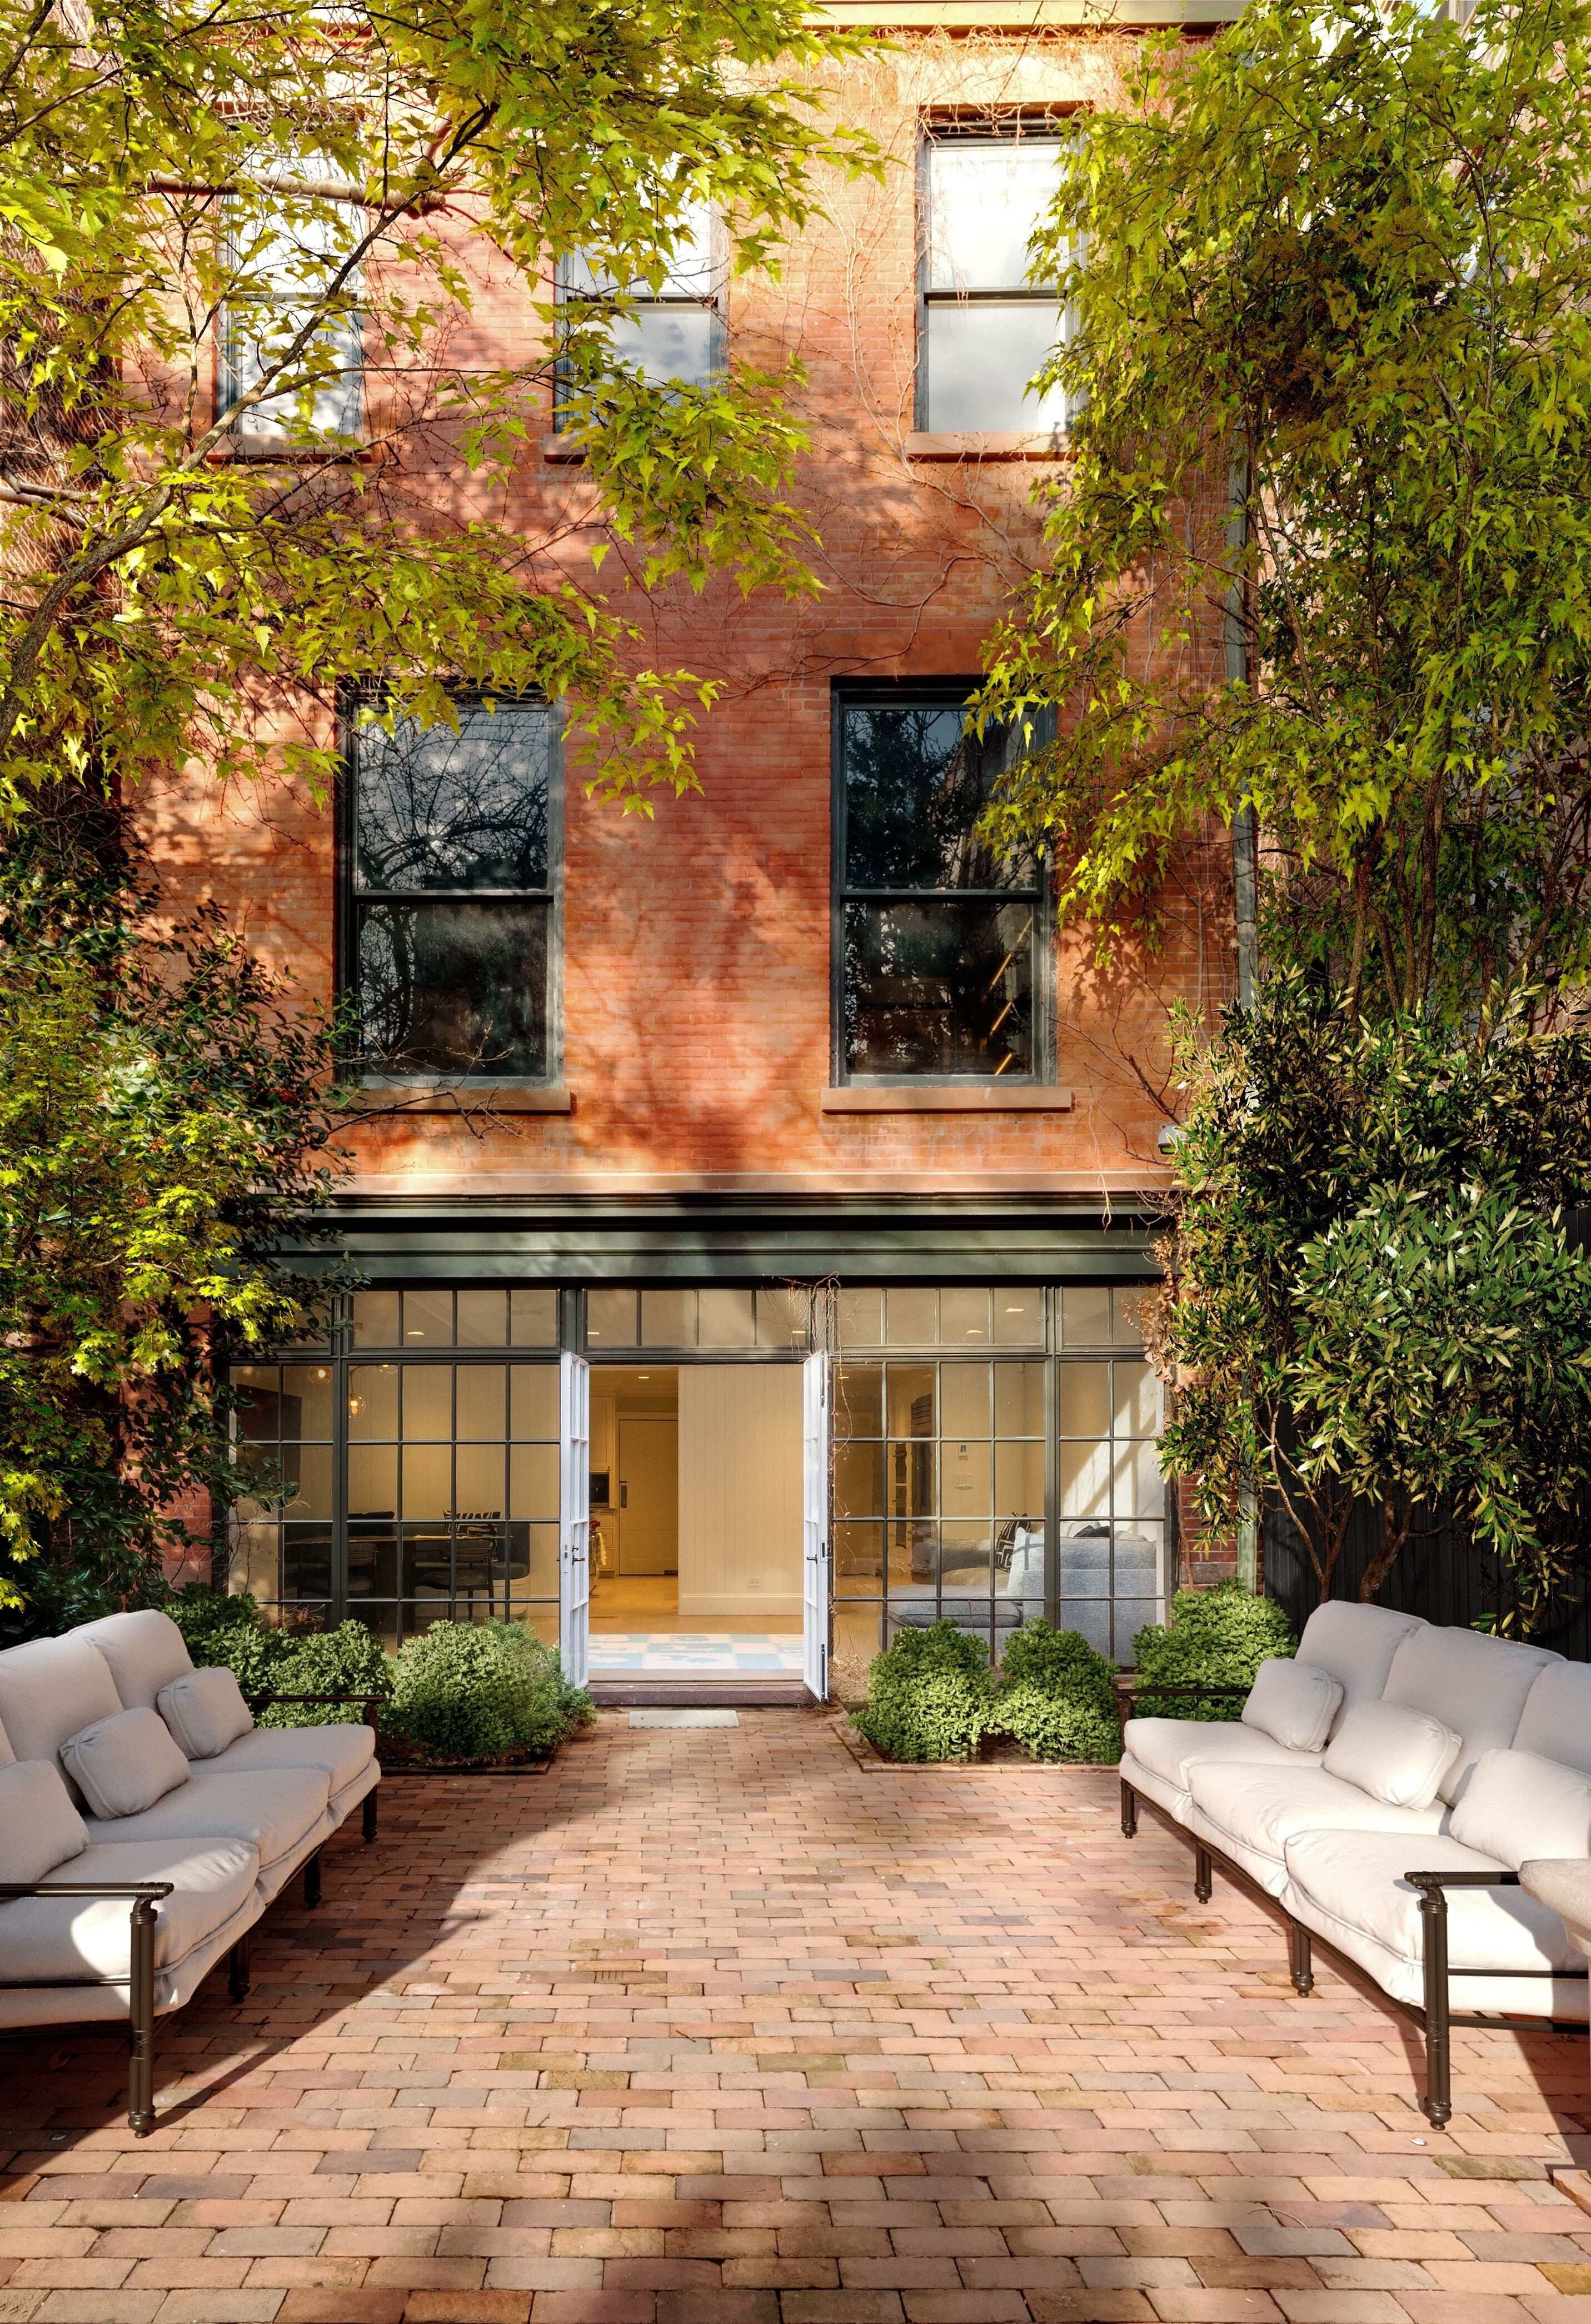 Property at 118 W 12TH ST, TOWNHOUSE West Village, New York, New York 10011